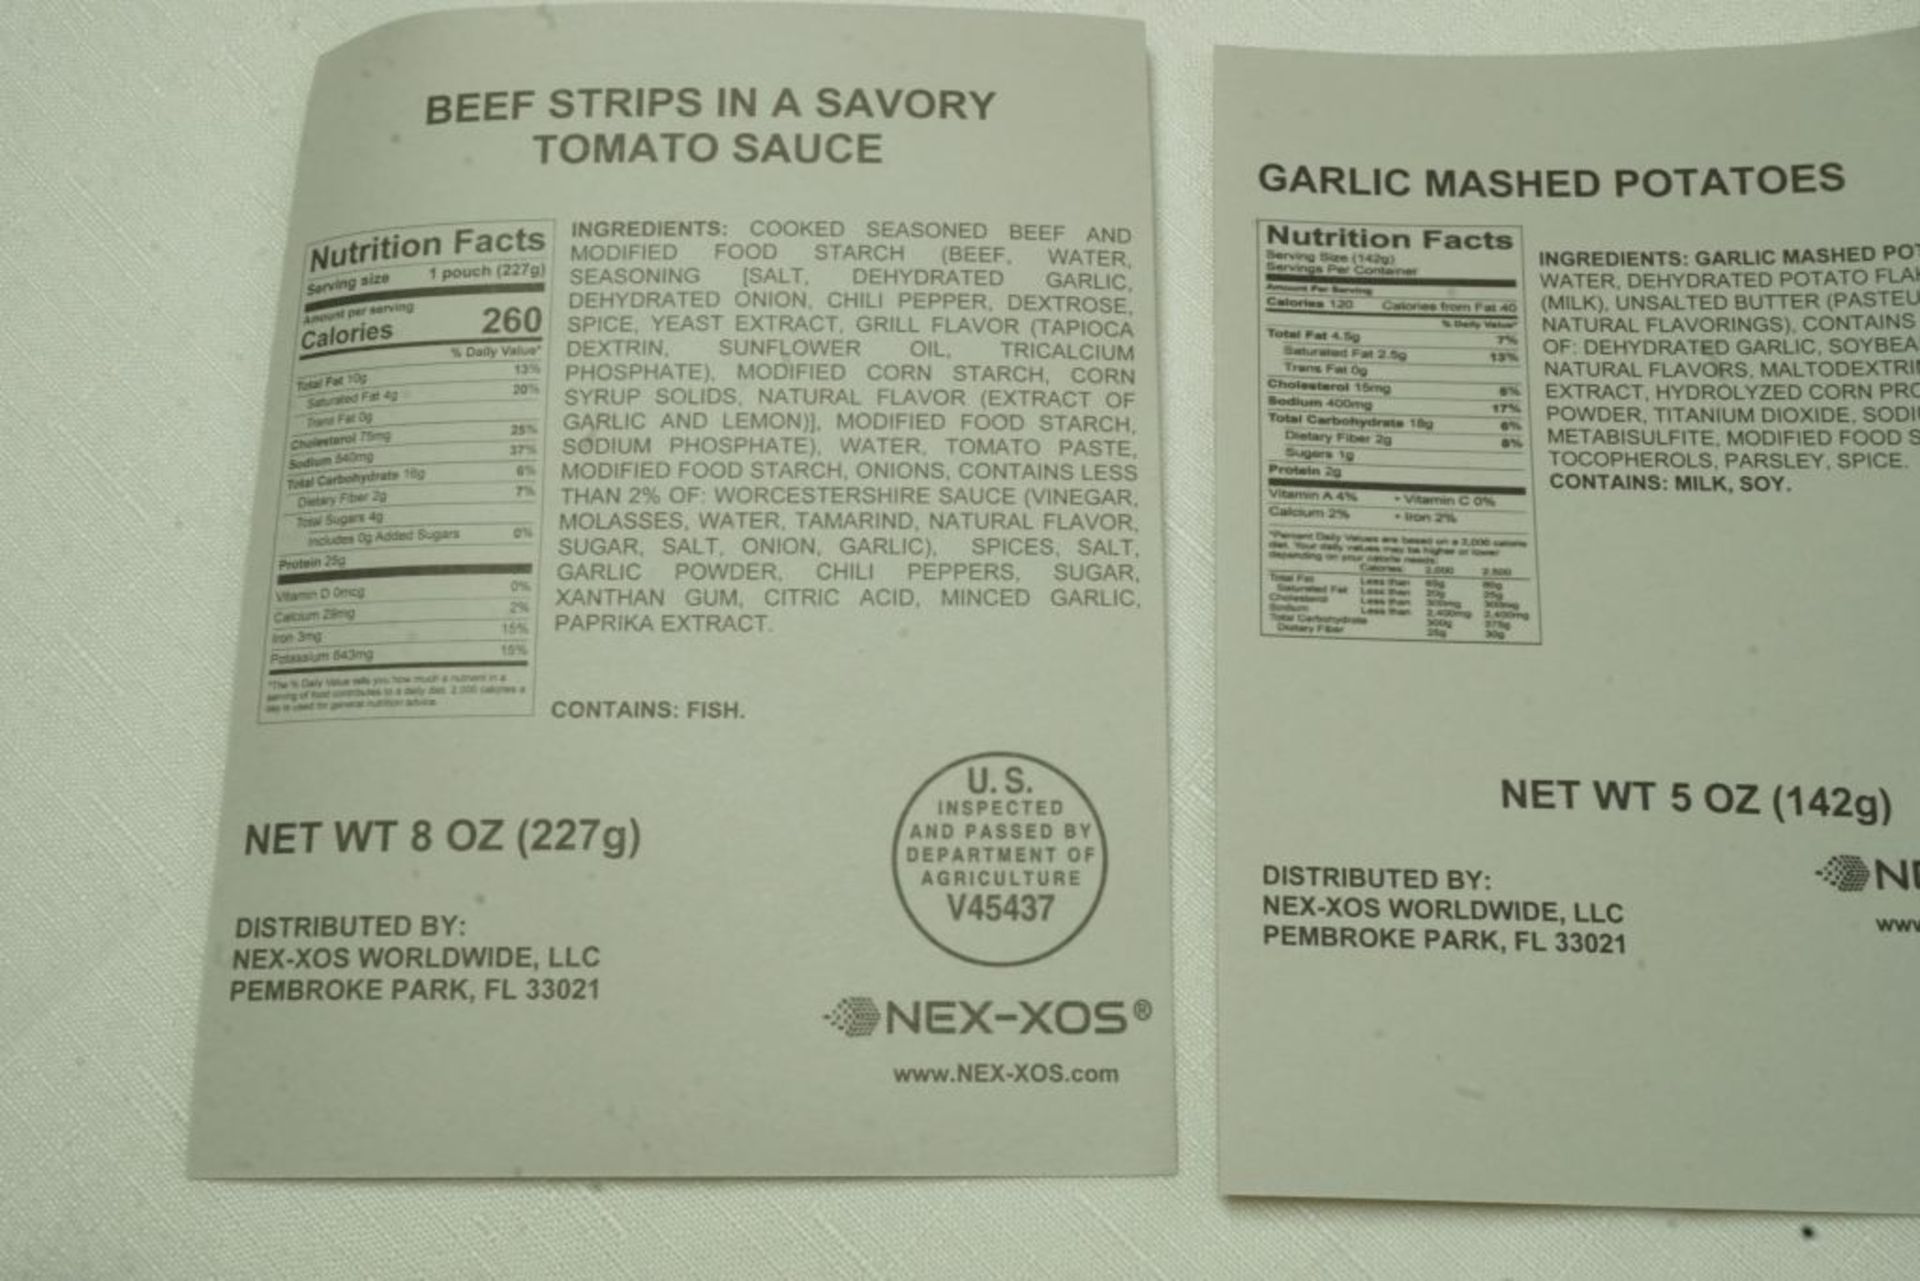 Lot of (48) Cases of XMRE Meals - Extended Shelf Life Meal, Ready to Eat - Image 12 of 16